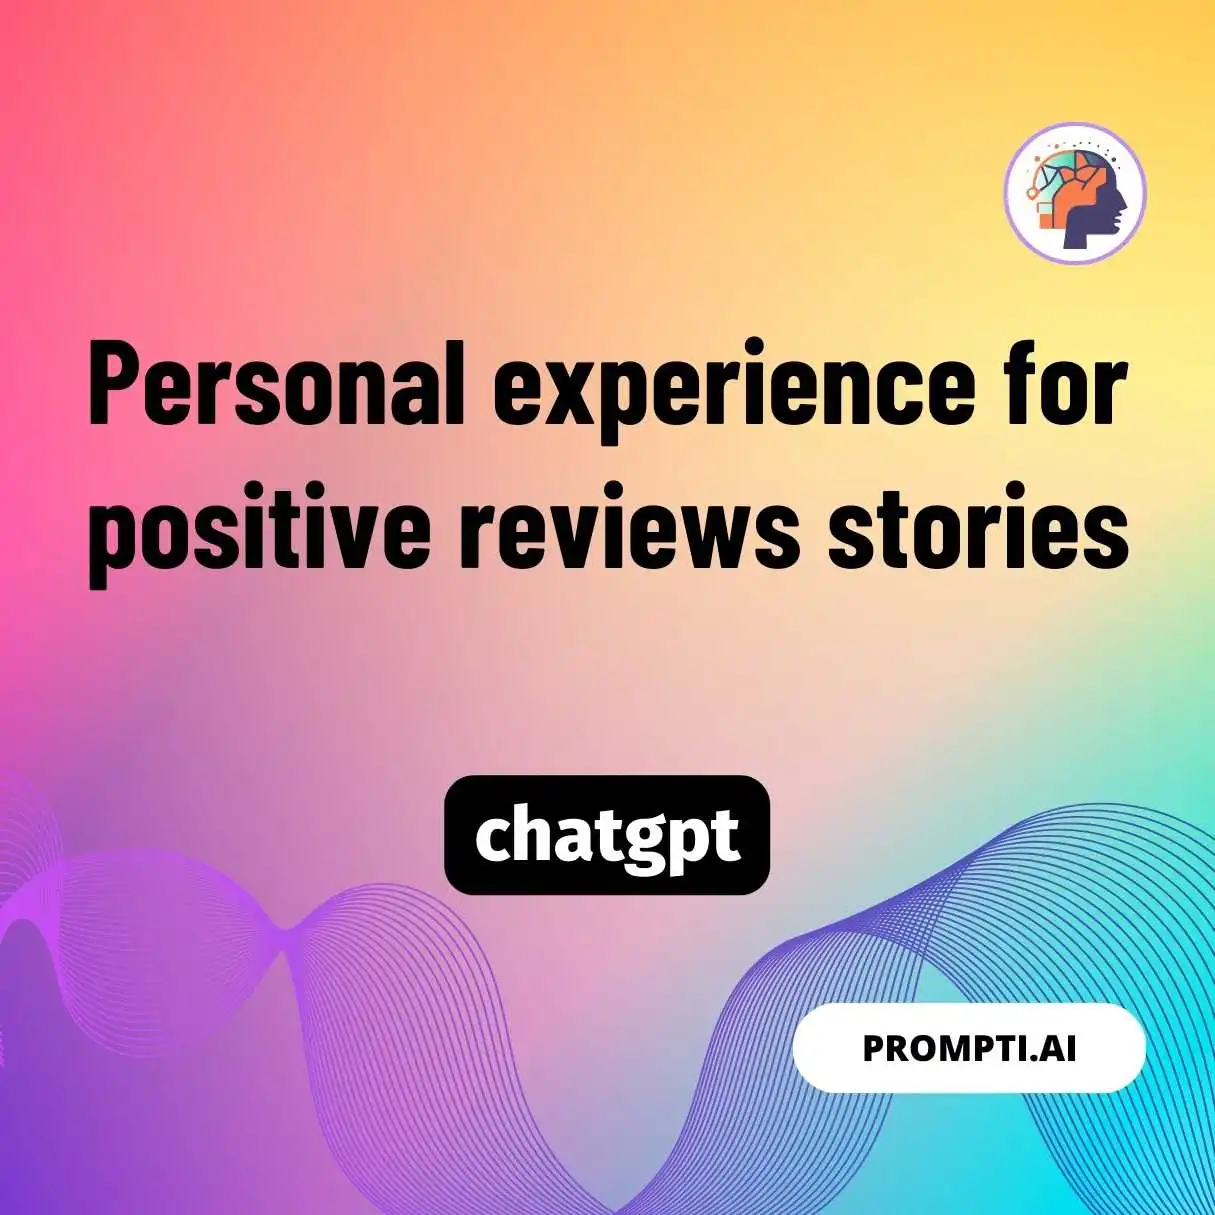 Personal experience for positive reviews stories